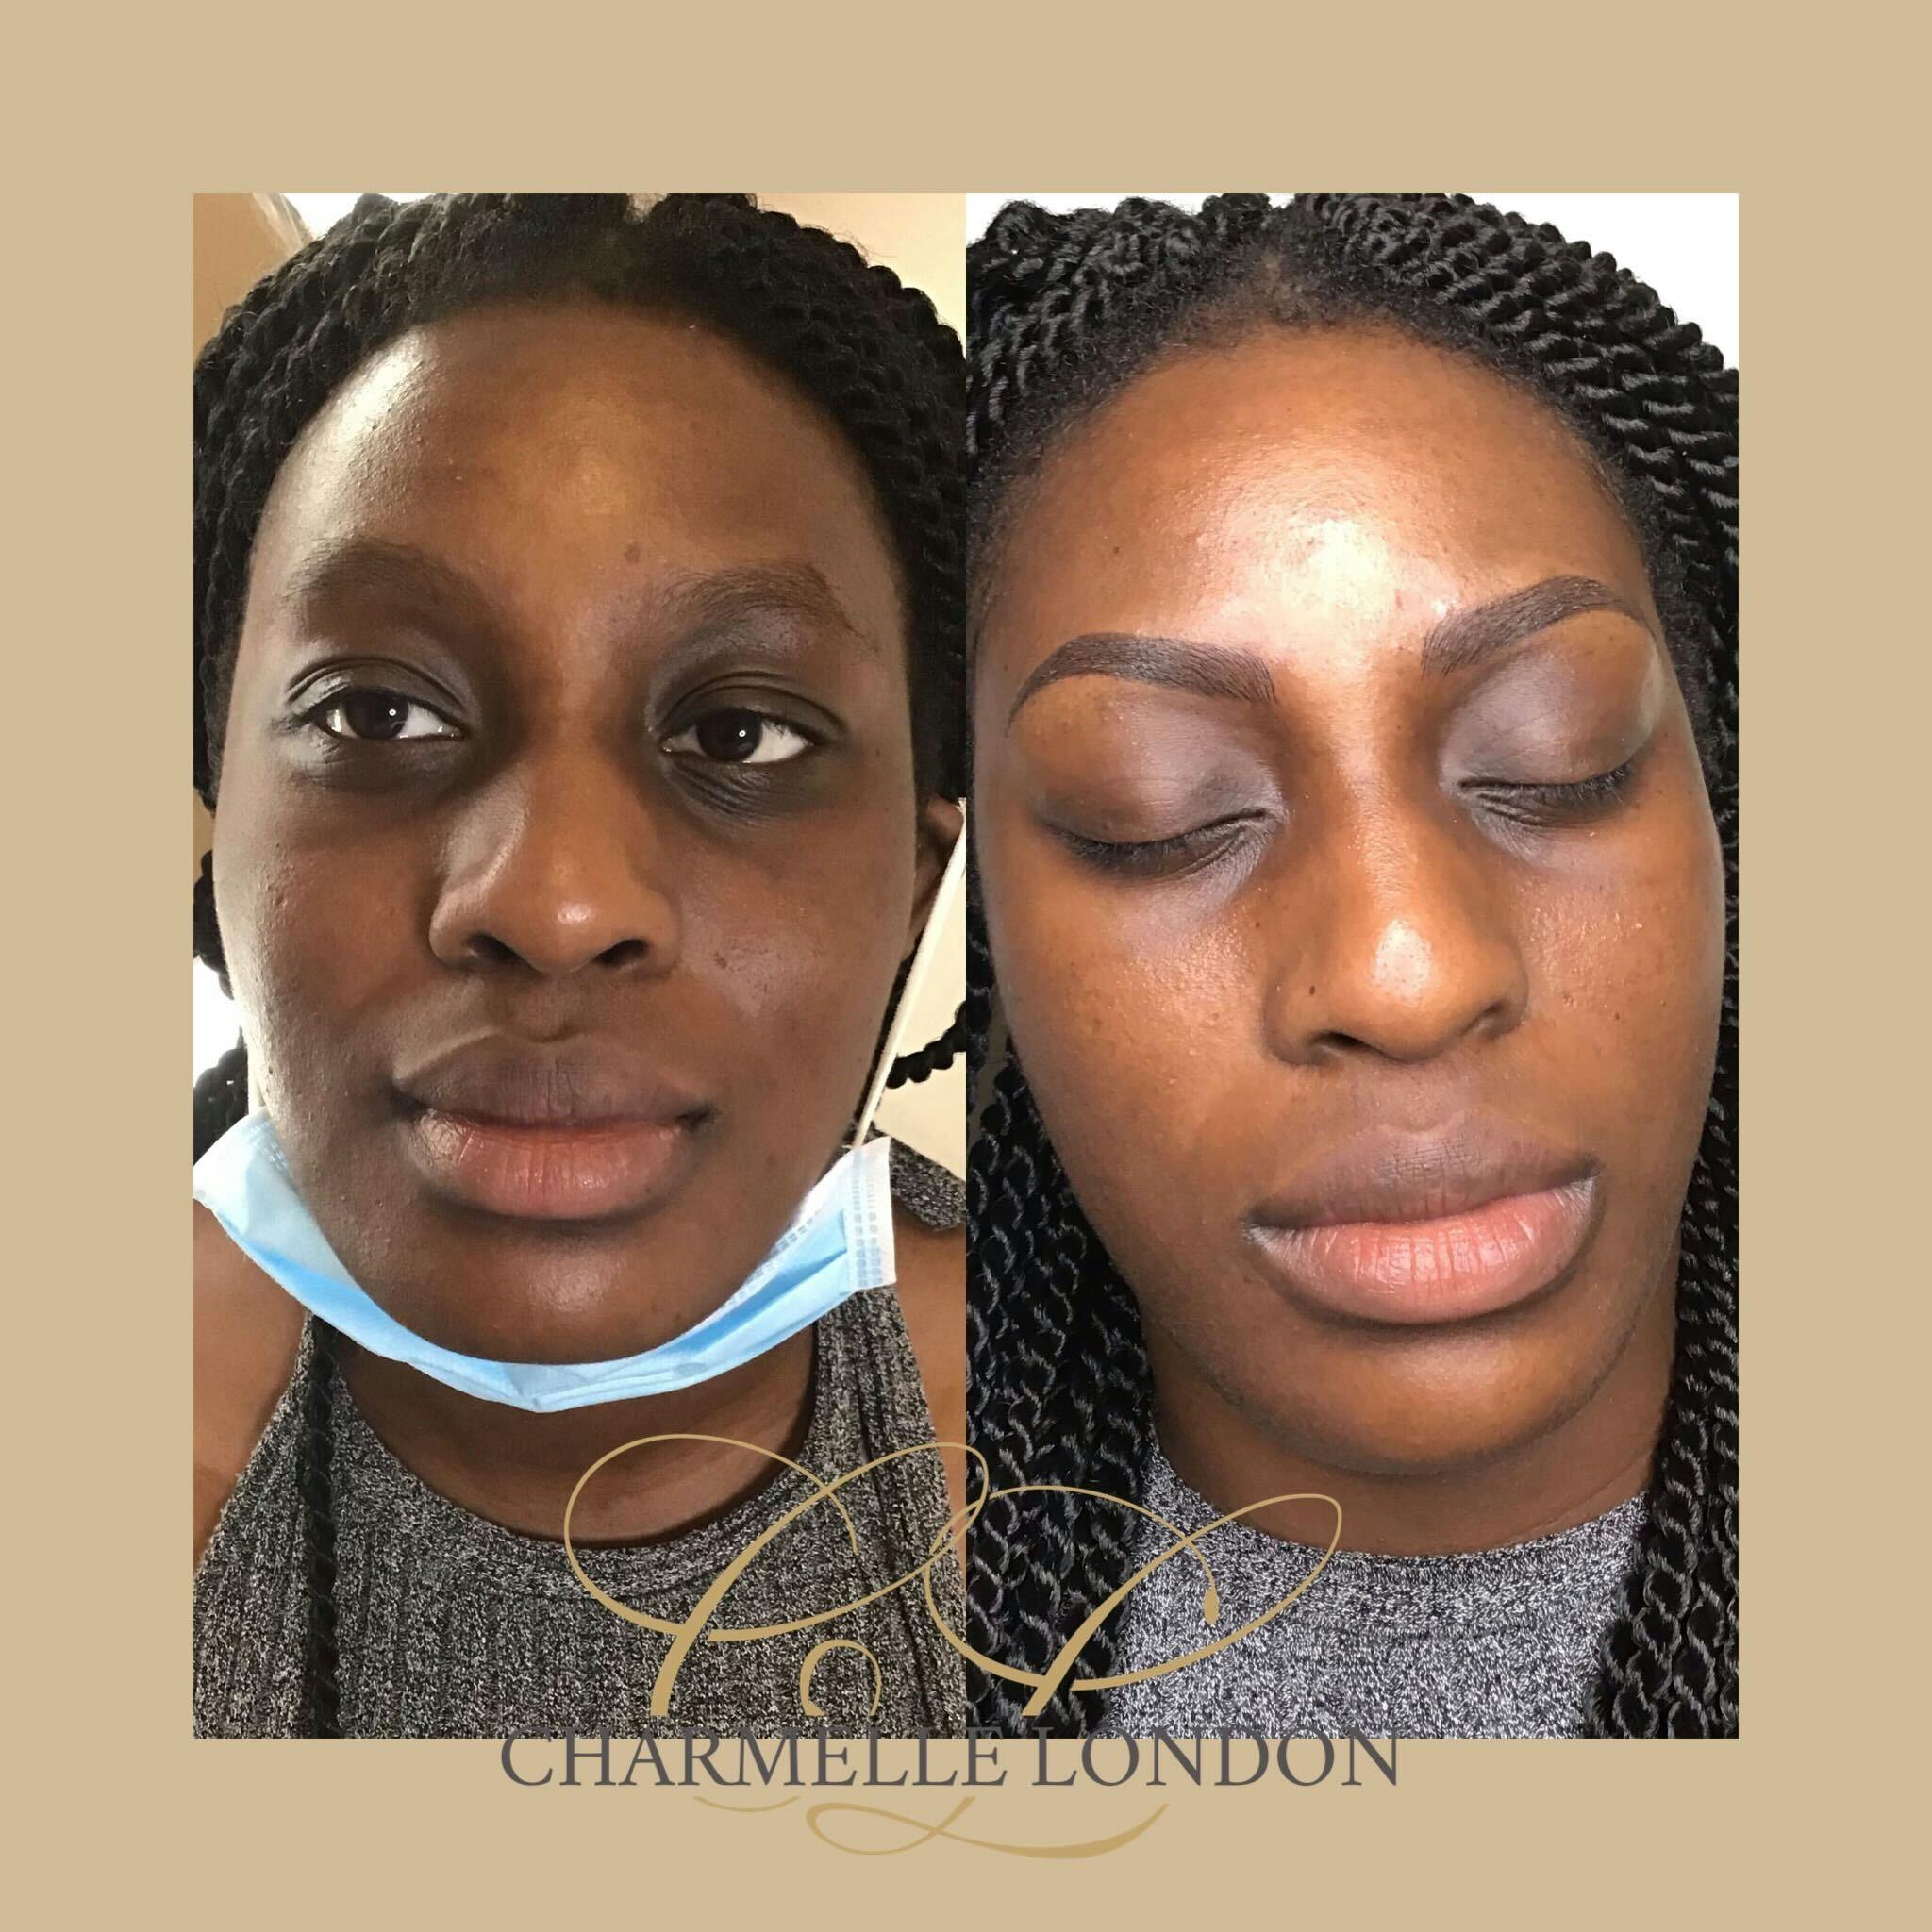 unse via beundring Get the Permanent Makeup Look You've Always Wanted | Charmelle London